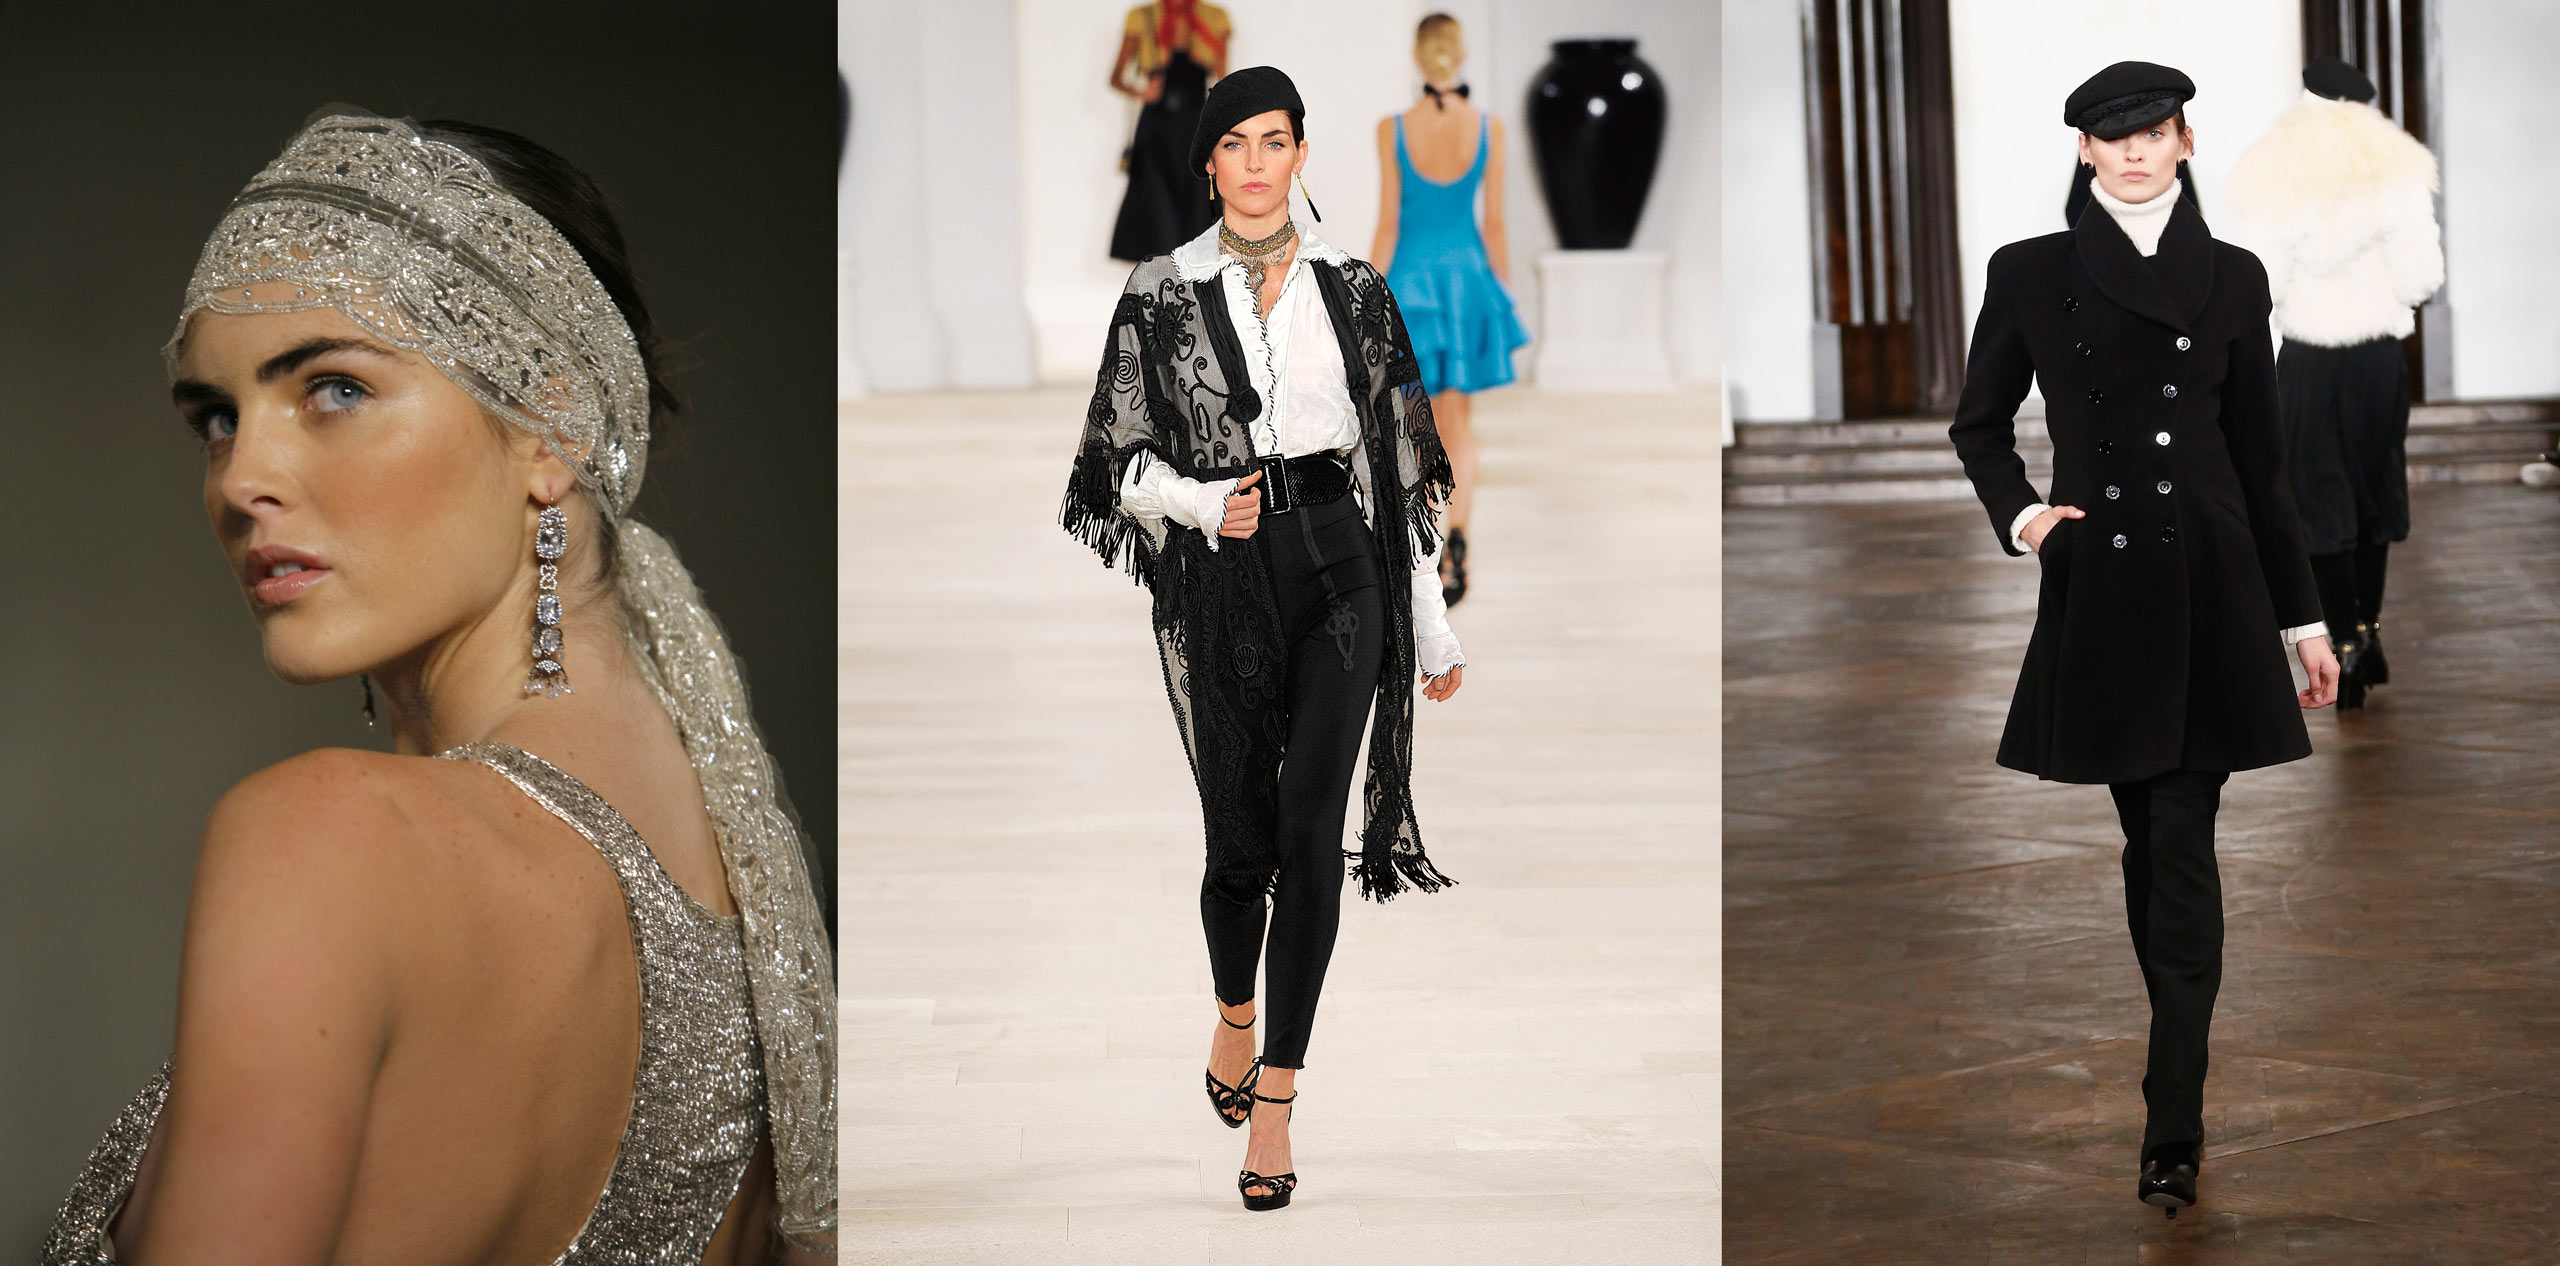                             Walking the runway for Ralph Lauren has been &#x201C;a dream&#x201D; for Rhoda, pictured here in 2007 and twice in 2013. 